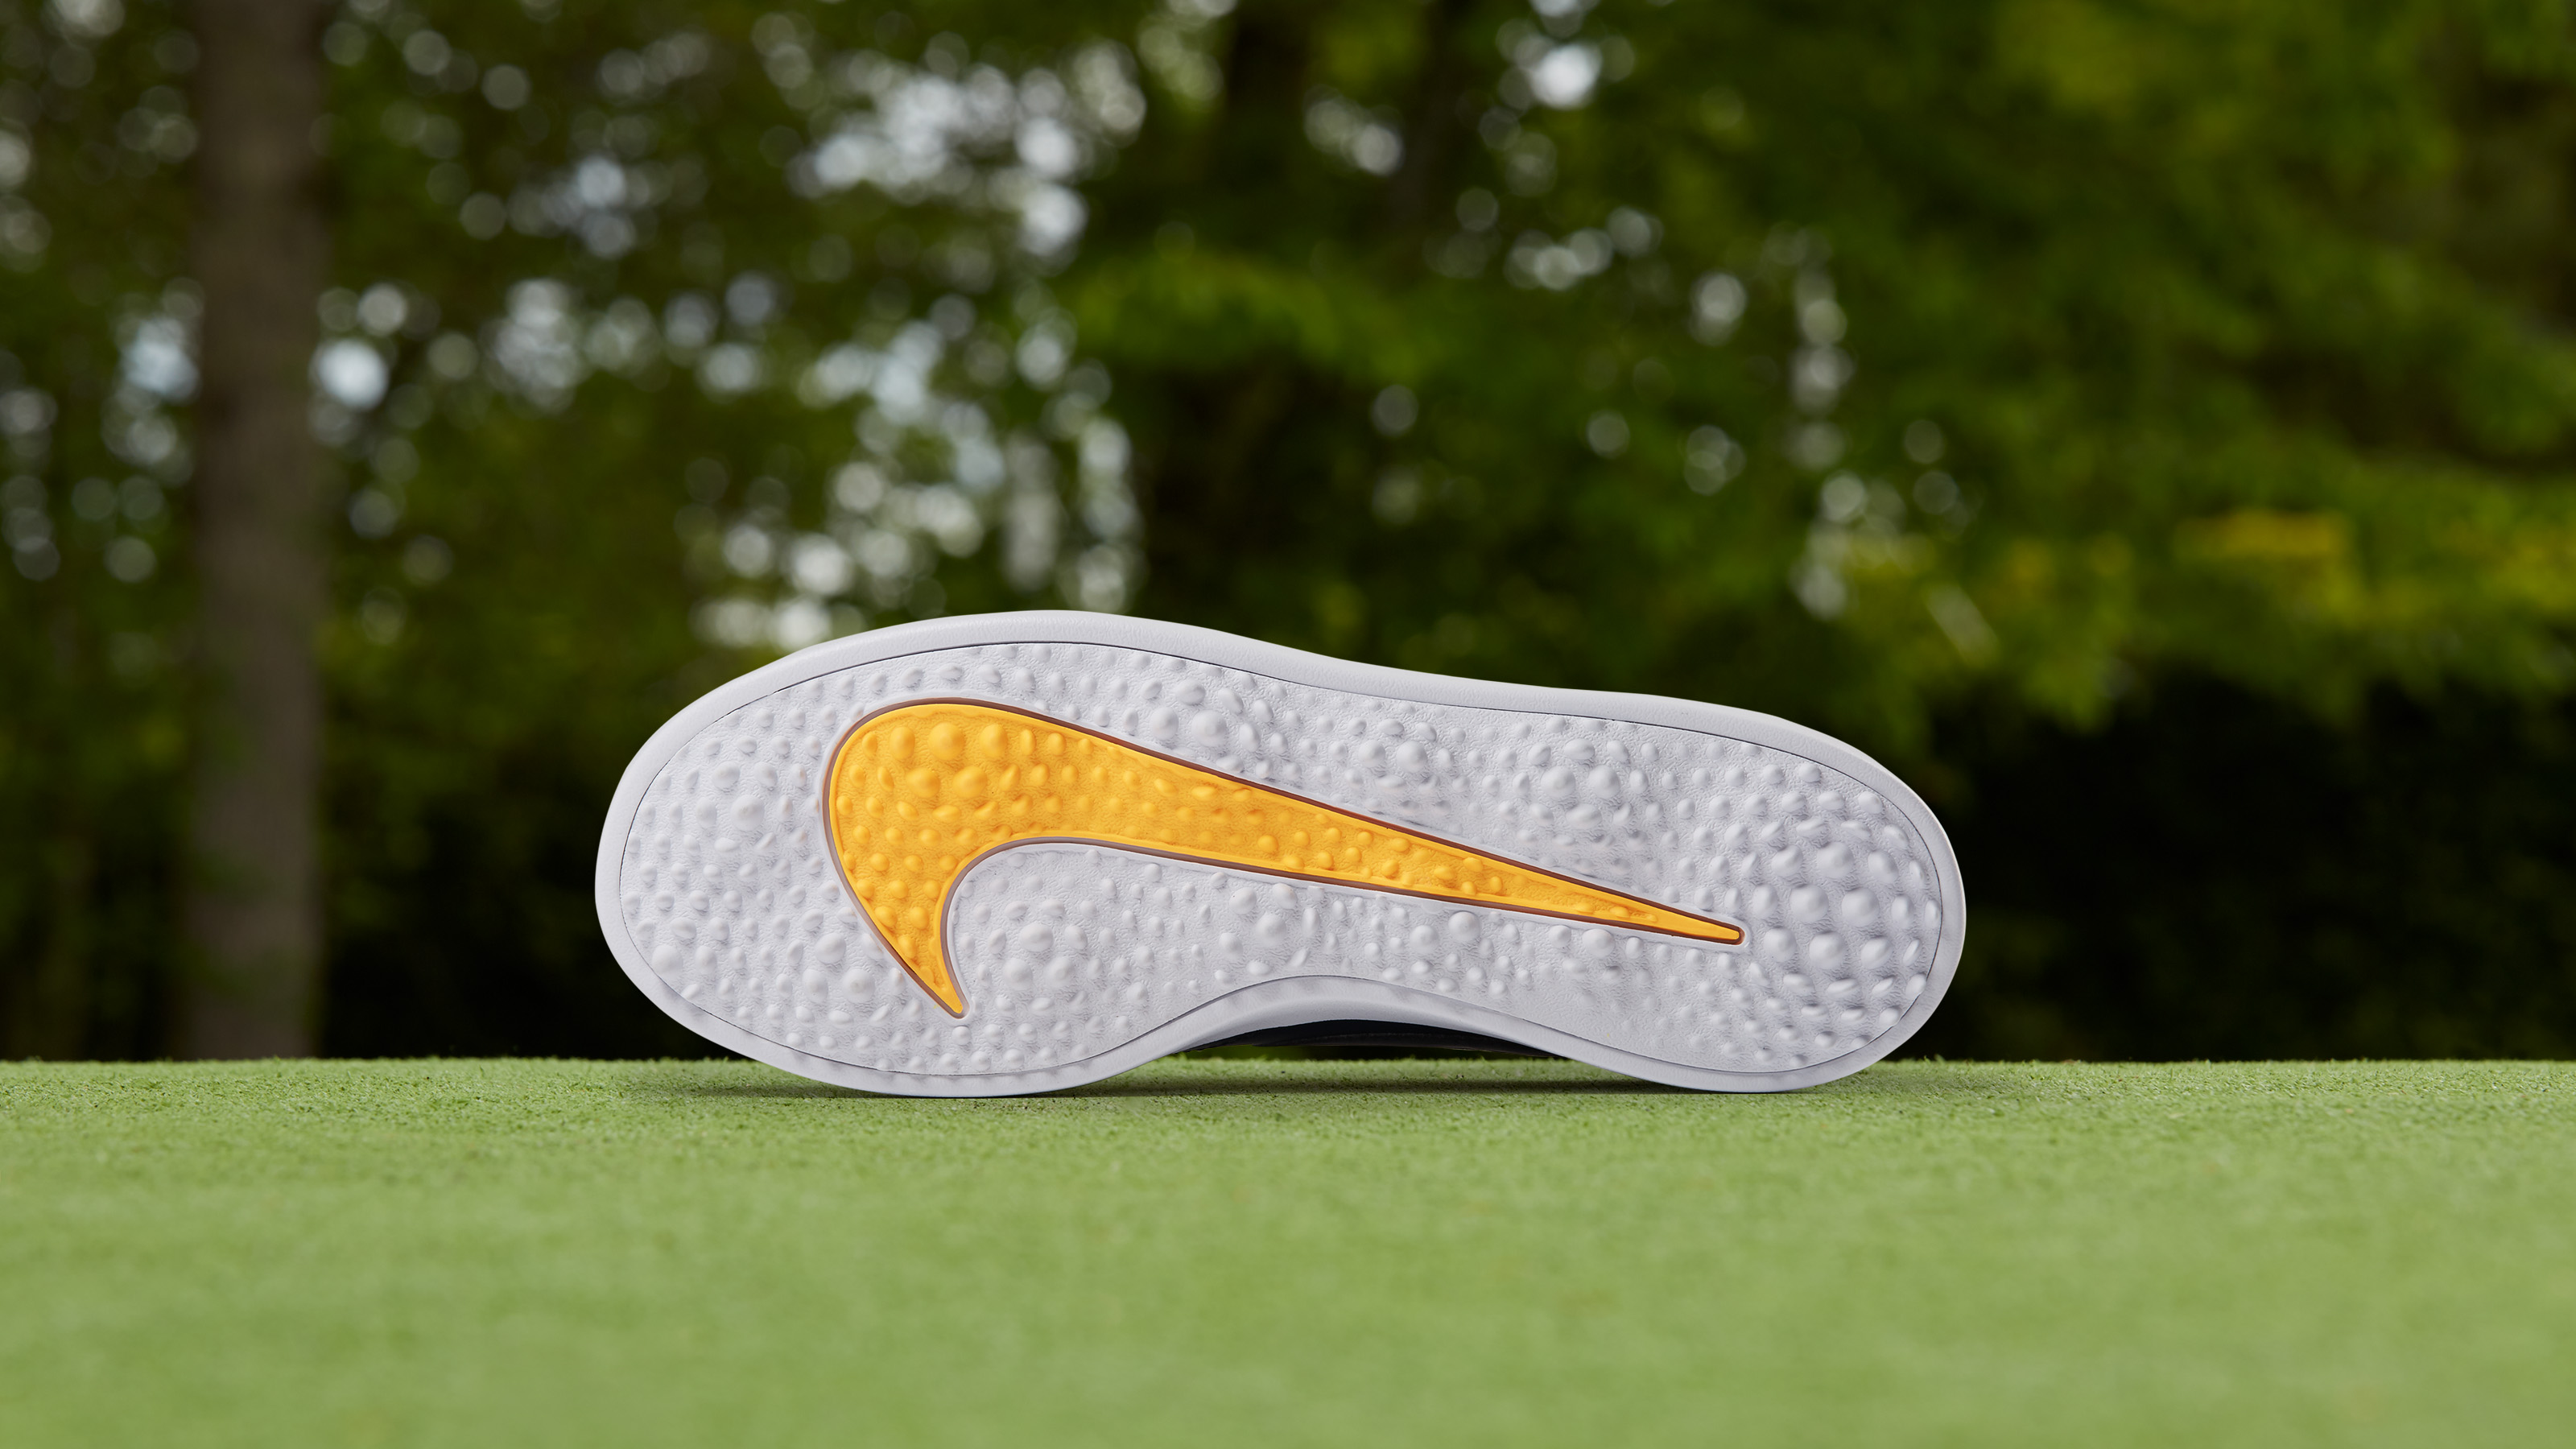 Nike Course Classic golf shoes inspired 